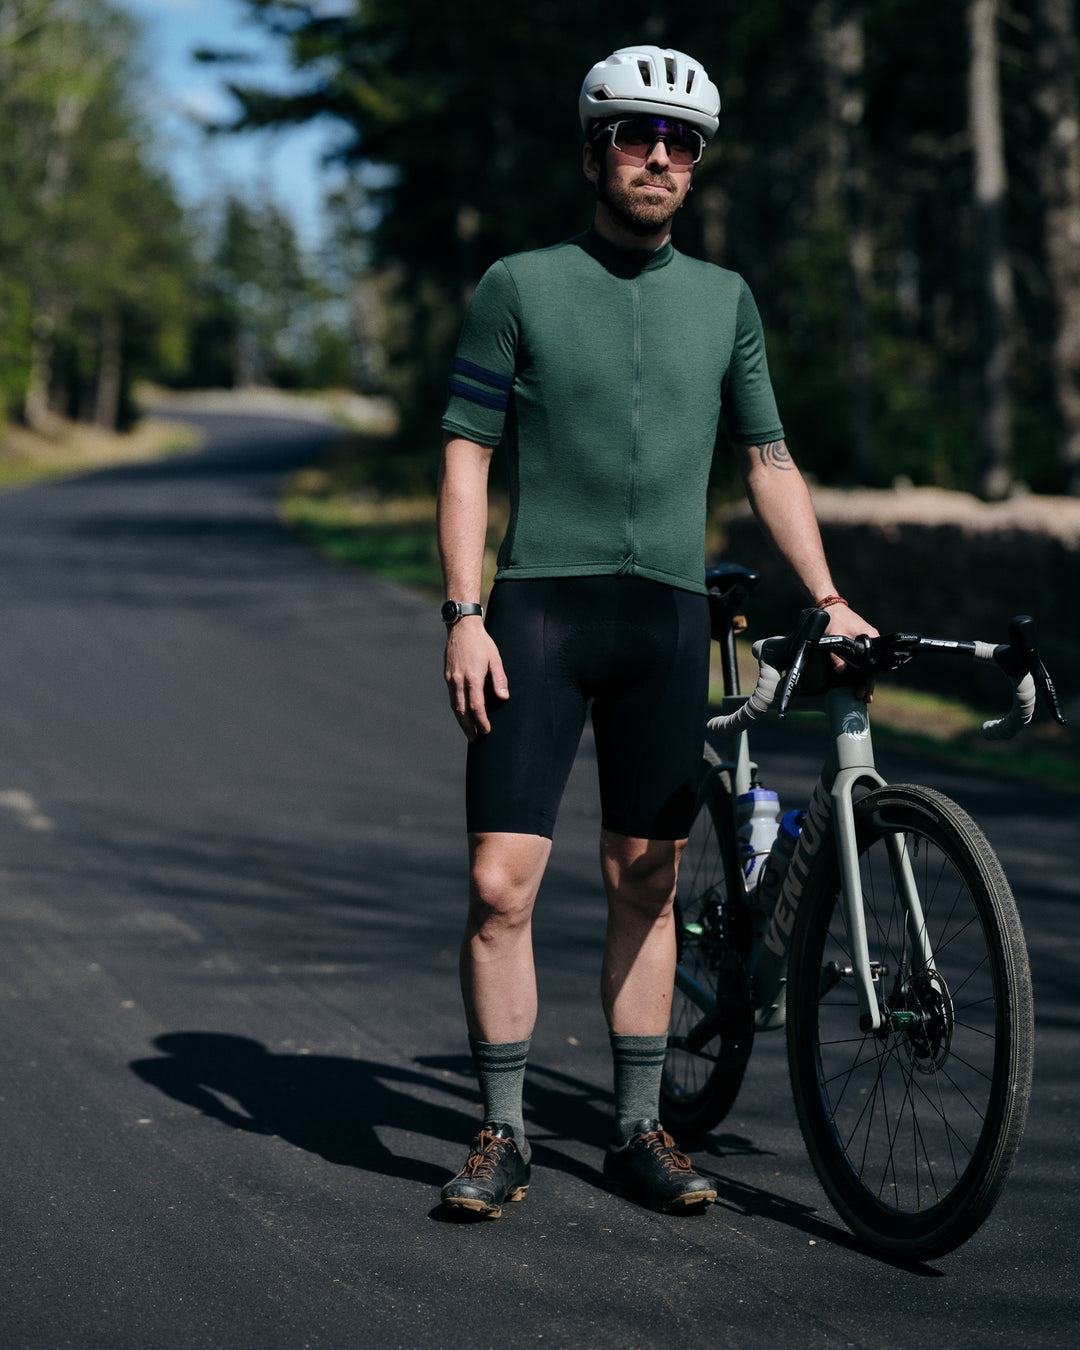 Pinebury Rangeley Long Sleeve Merino Wool Cycling Jersey in Pine. Male cyclist stopped on a road standing next to his gravel bike. Looking towards the camera wearing a green short sleeve jersey with two blue stripes on the arm, black bibs and green socks with a white helmet.